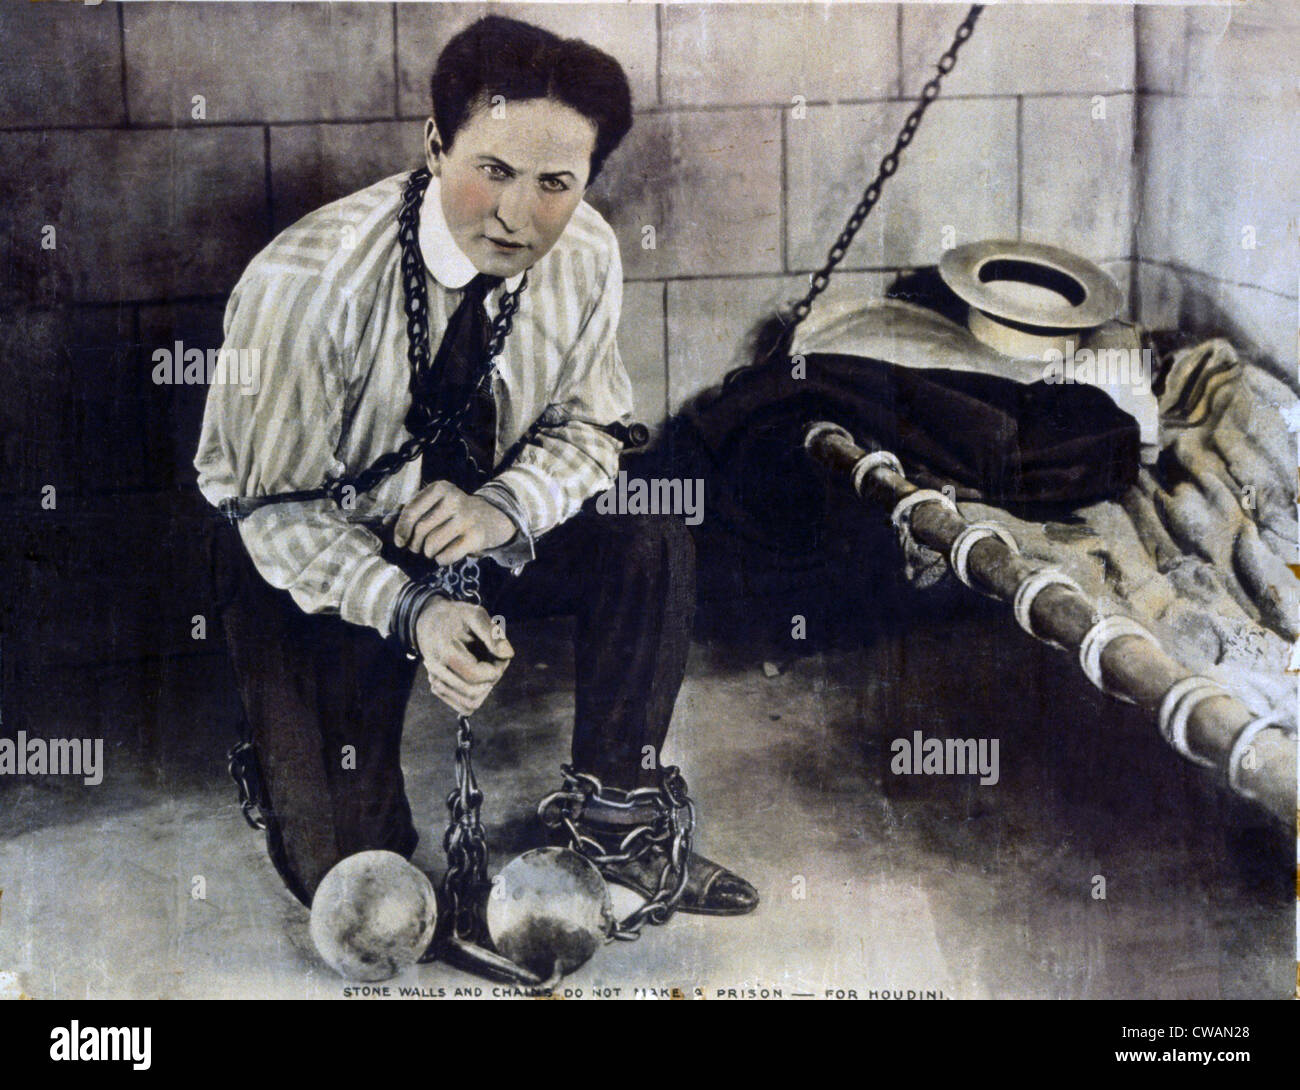 Harry Houdini (1874-1926), in still from a movie he made with Famous Players-Lasky Corporation, shows him chained in a prison Stock Photo